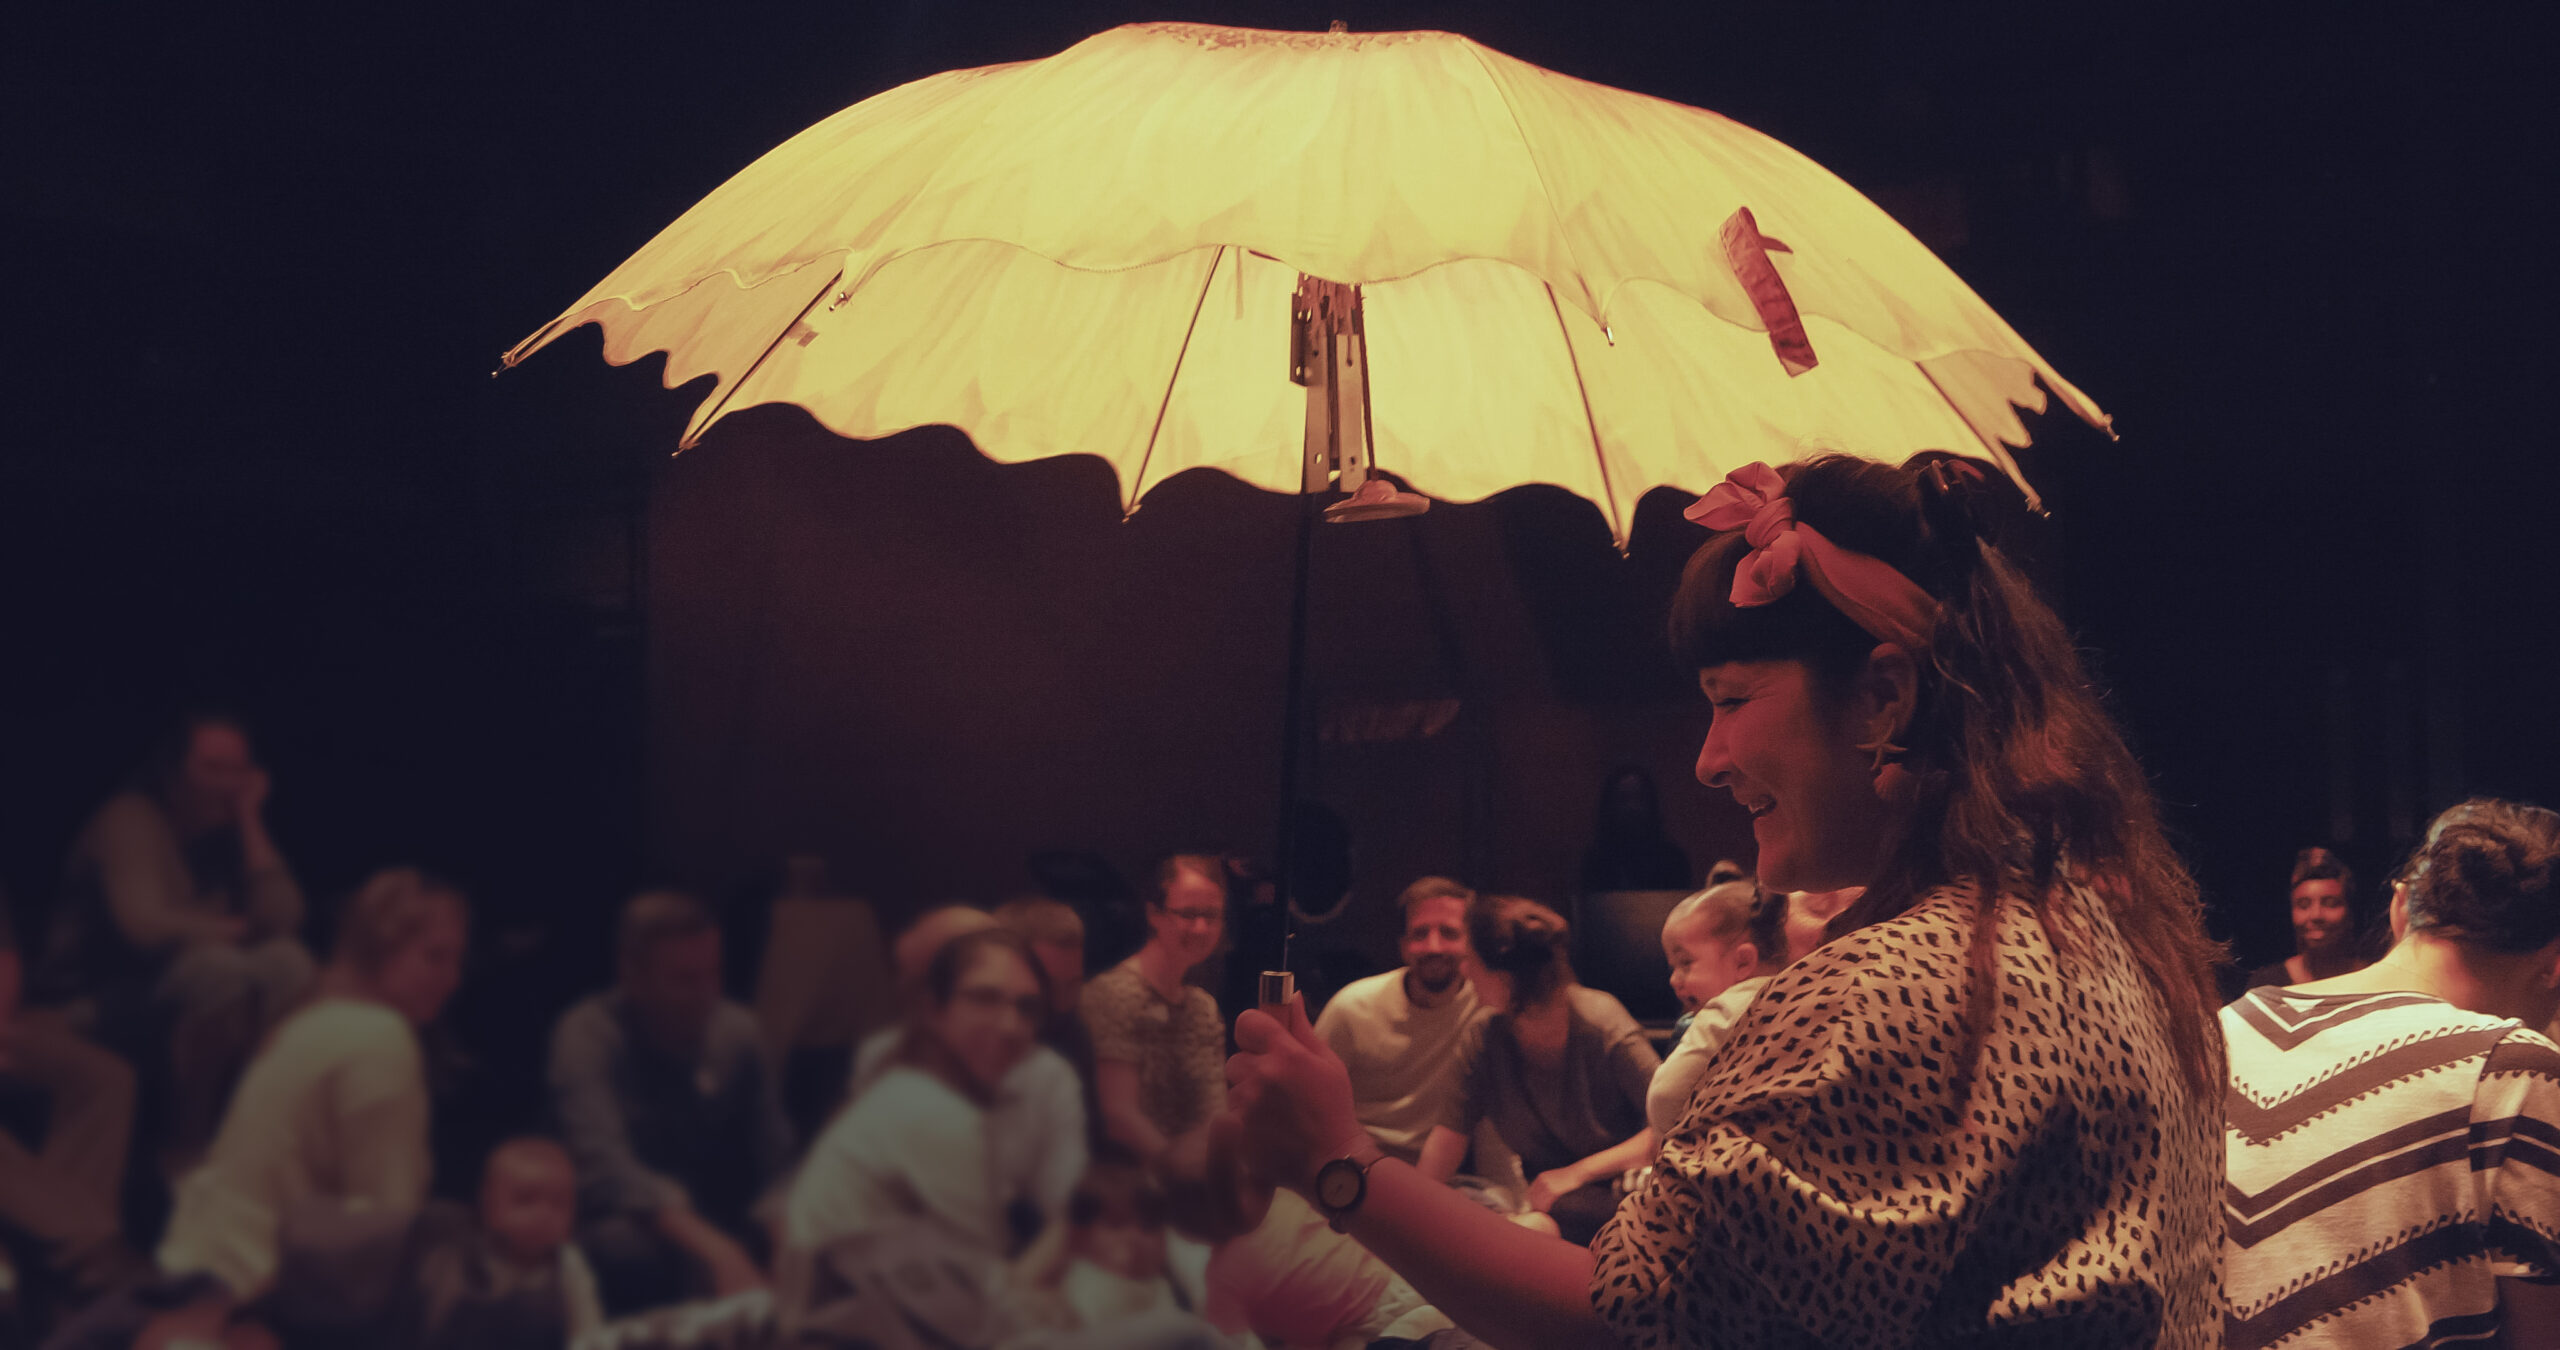 In image of a person holding a yellow umbrella infront of a crowd.